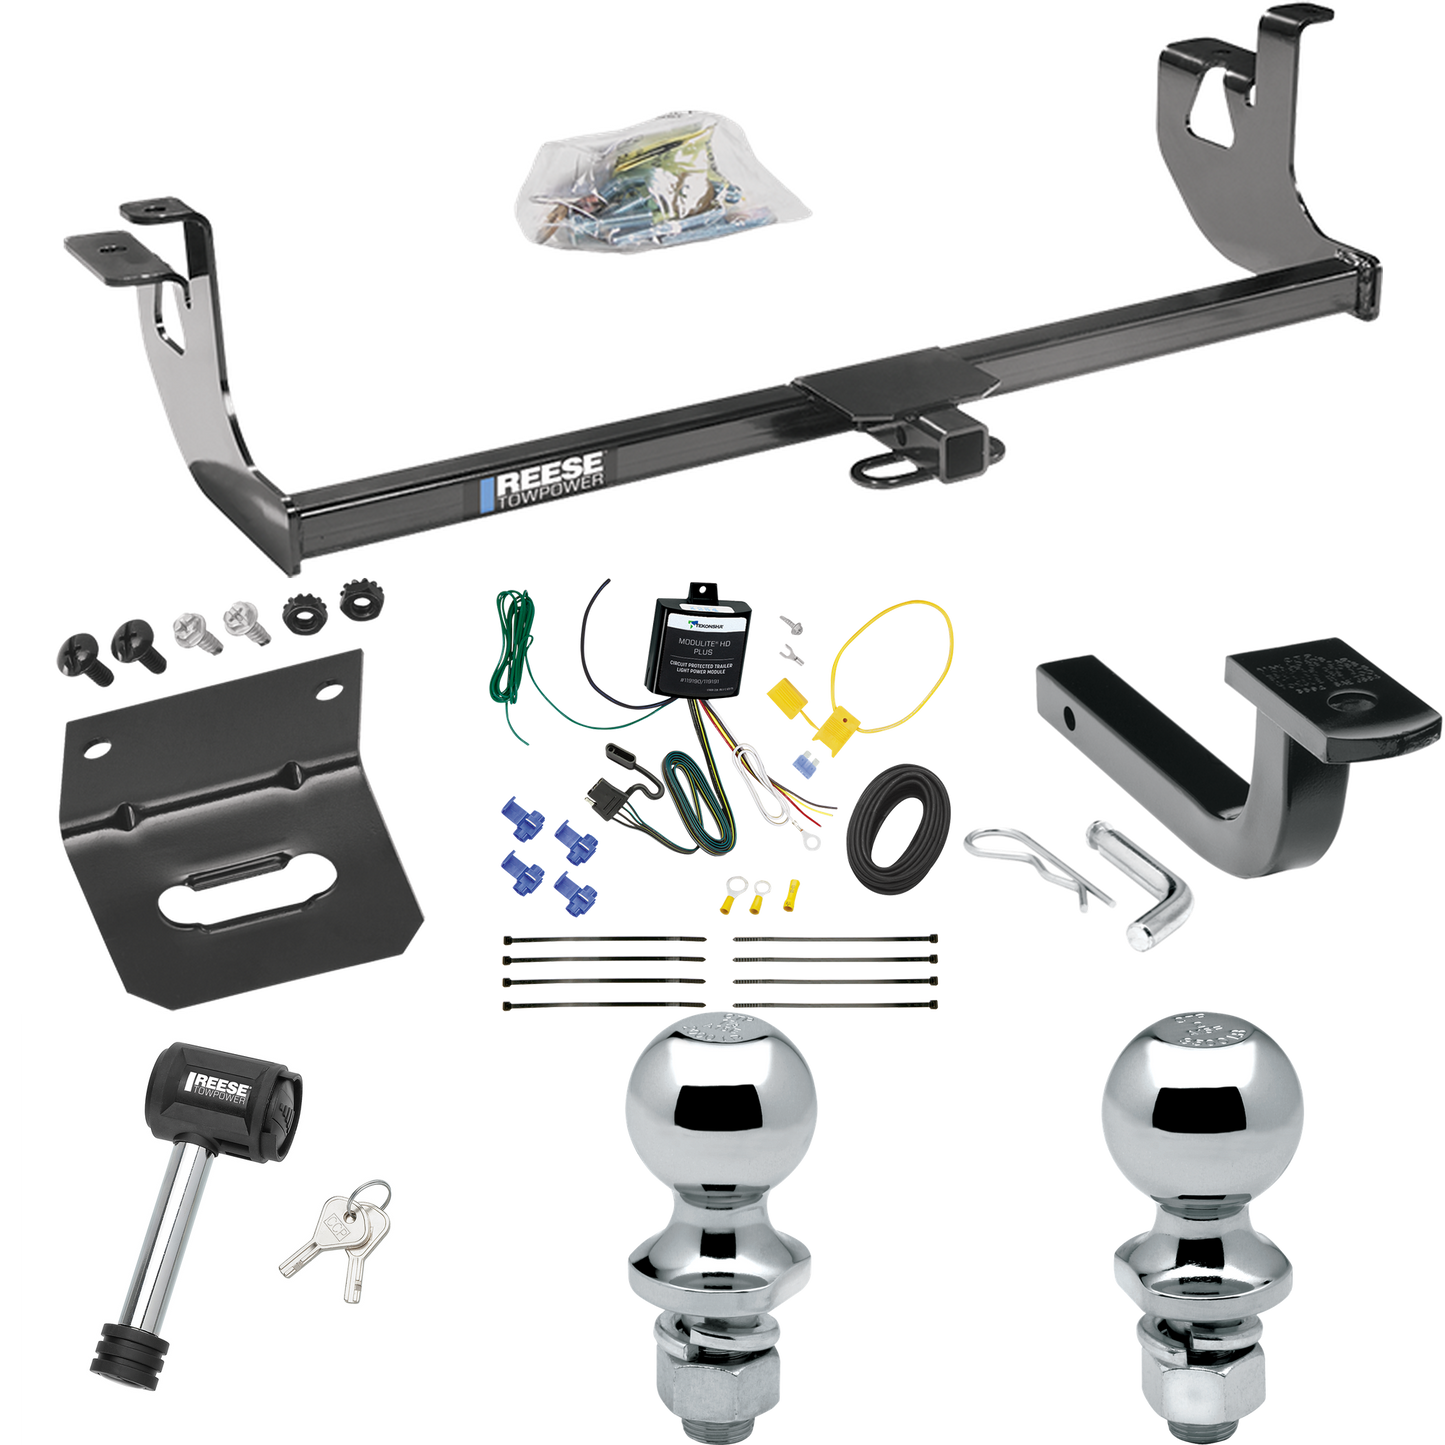 Fits 2006-2009 Volkswagen GTI Trailer Hitch Tow PKG w/ 4-Flat Wiring Harness + Draw-Bar + 1-7/8" + 2" Ball + Wiring Bracket + Hitch Lock (For 2 Dr. Hatchback Models) By Reese Towpower